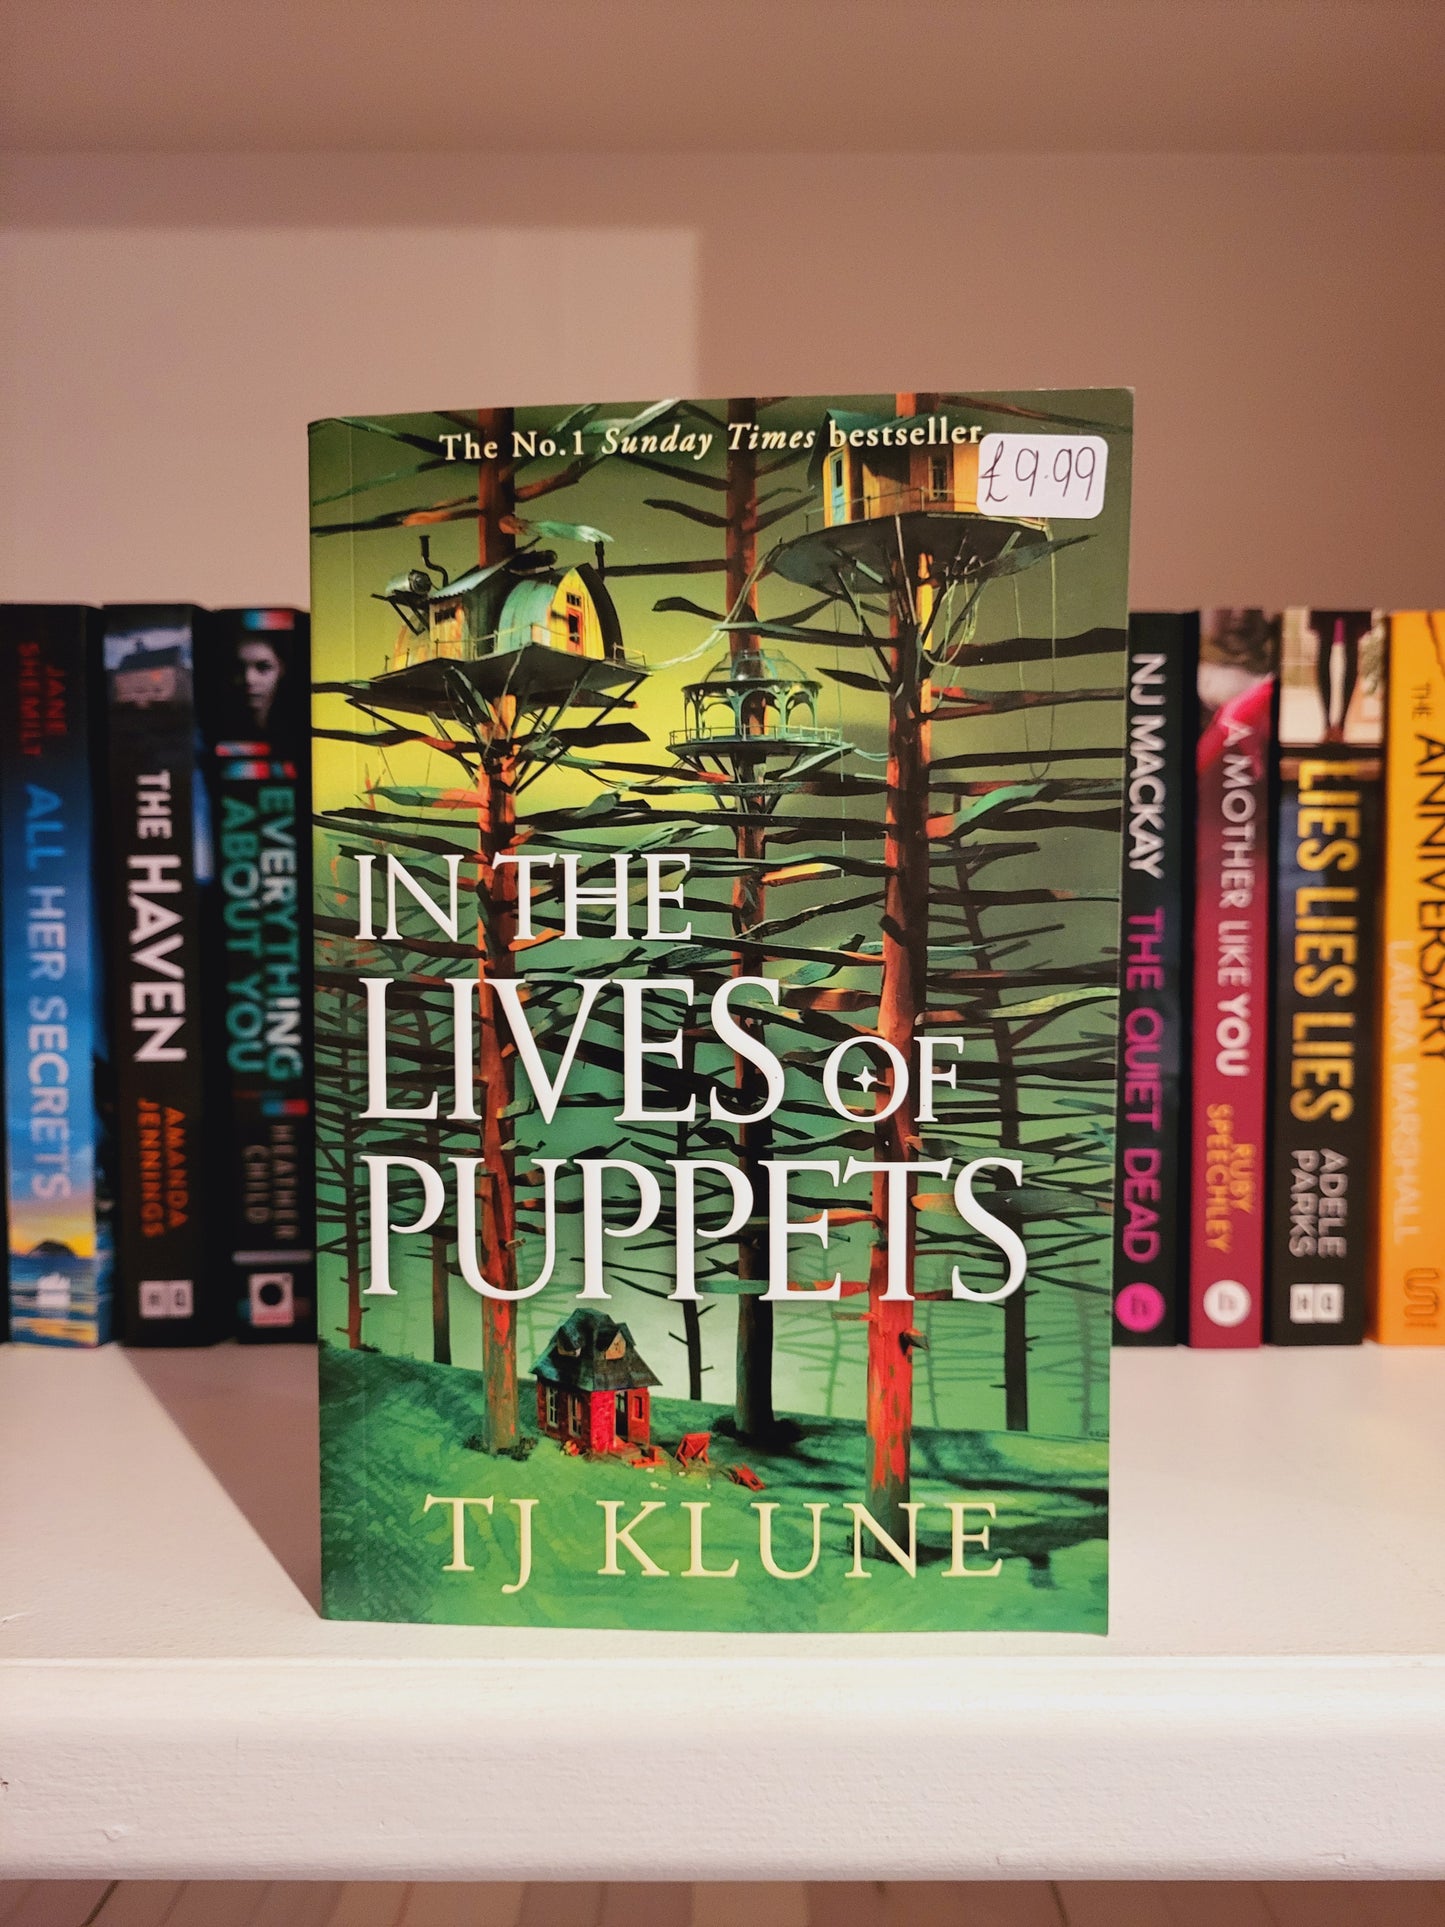 In the Lives of Puppets - TJ Klune